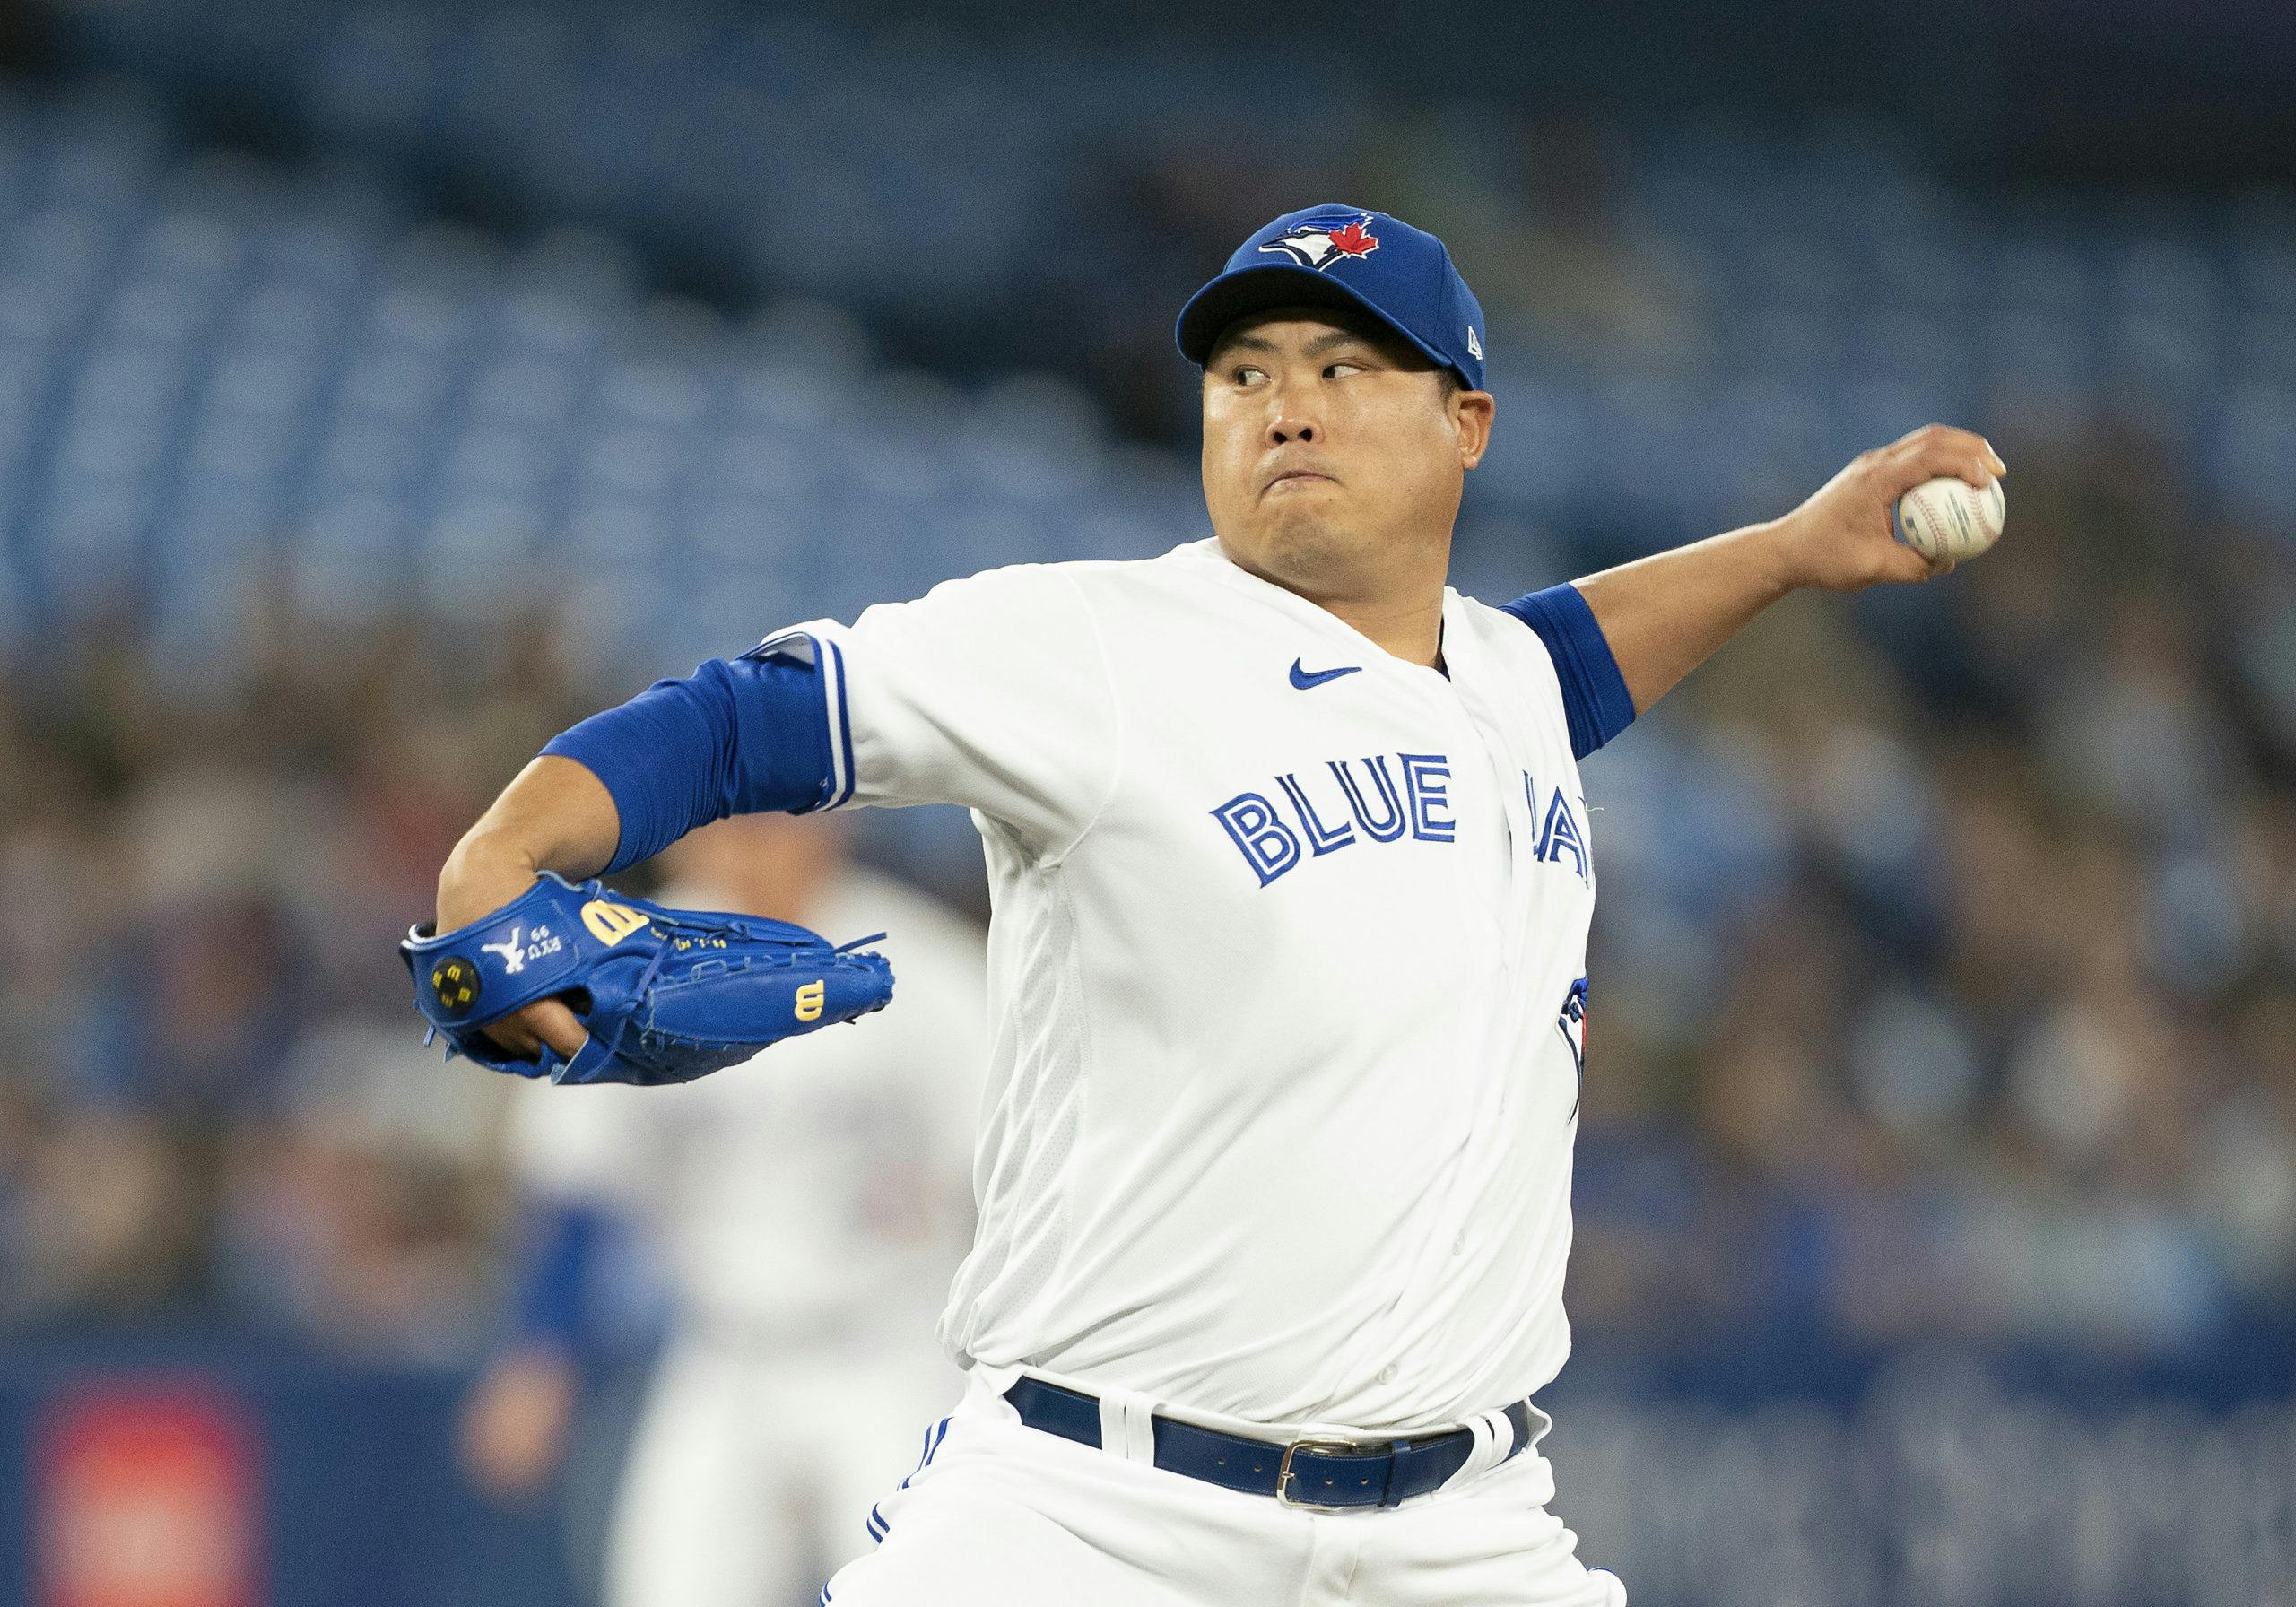 Hyun Jin Ryu keeps Jays in game in his return, but the bullpen?